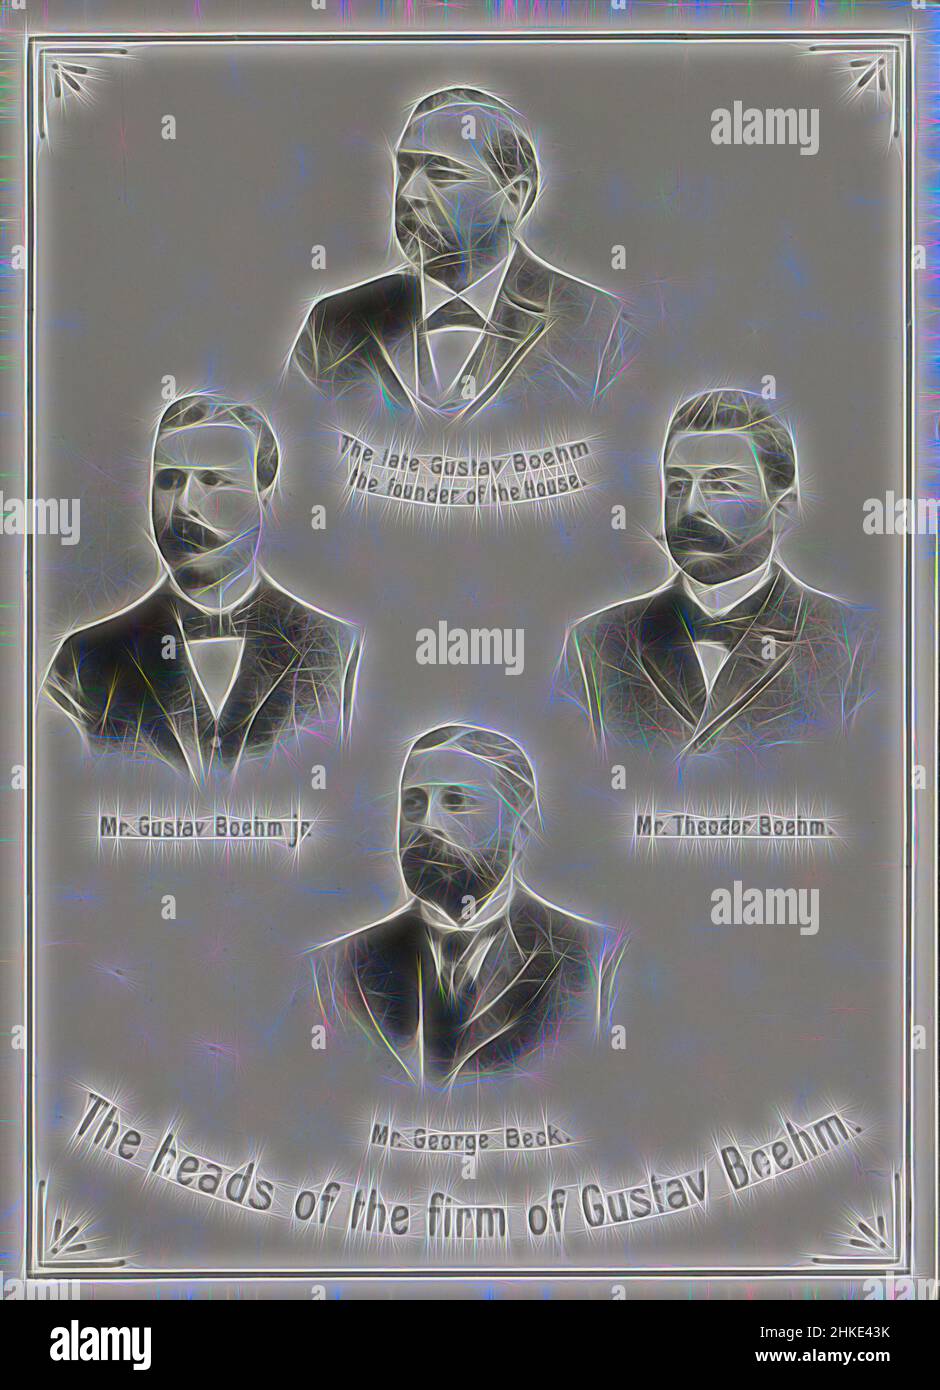 Inspired by Photomontage of the executives of Gustav Boehm's firm: founder the late Gustav Boehm sr., Gustav Boehm jr., Theodor Boehm and George Beck, Part of Photographs of Gustav Boehm's World Tour 1899-1901, series 2., 1899 - 1901, paper, gelatin silver print, height 82 mm × width 60 mm, Reimagined by Artotop. Classic art reinvented with a modern twist. Design of warm cheerful glowing of brightness and light ray radiance. Photography inspired by surrealism and futurism, embracing dynamic energy of modern technology, movement, speed and revolutionize culture Stock Photo